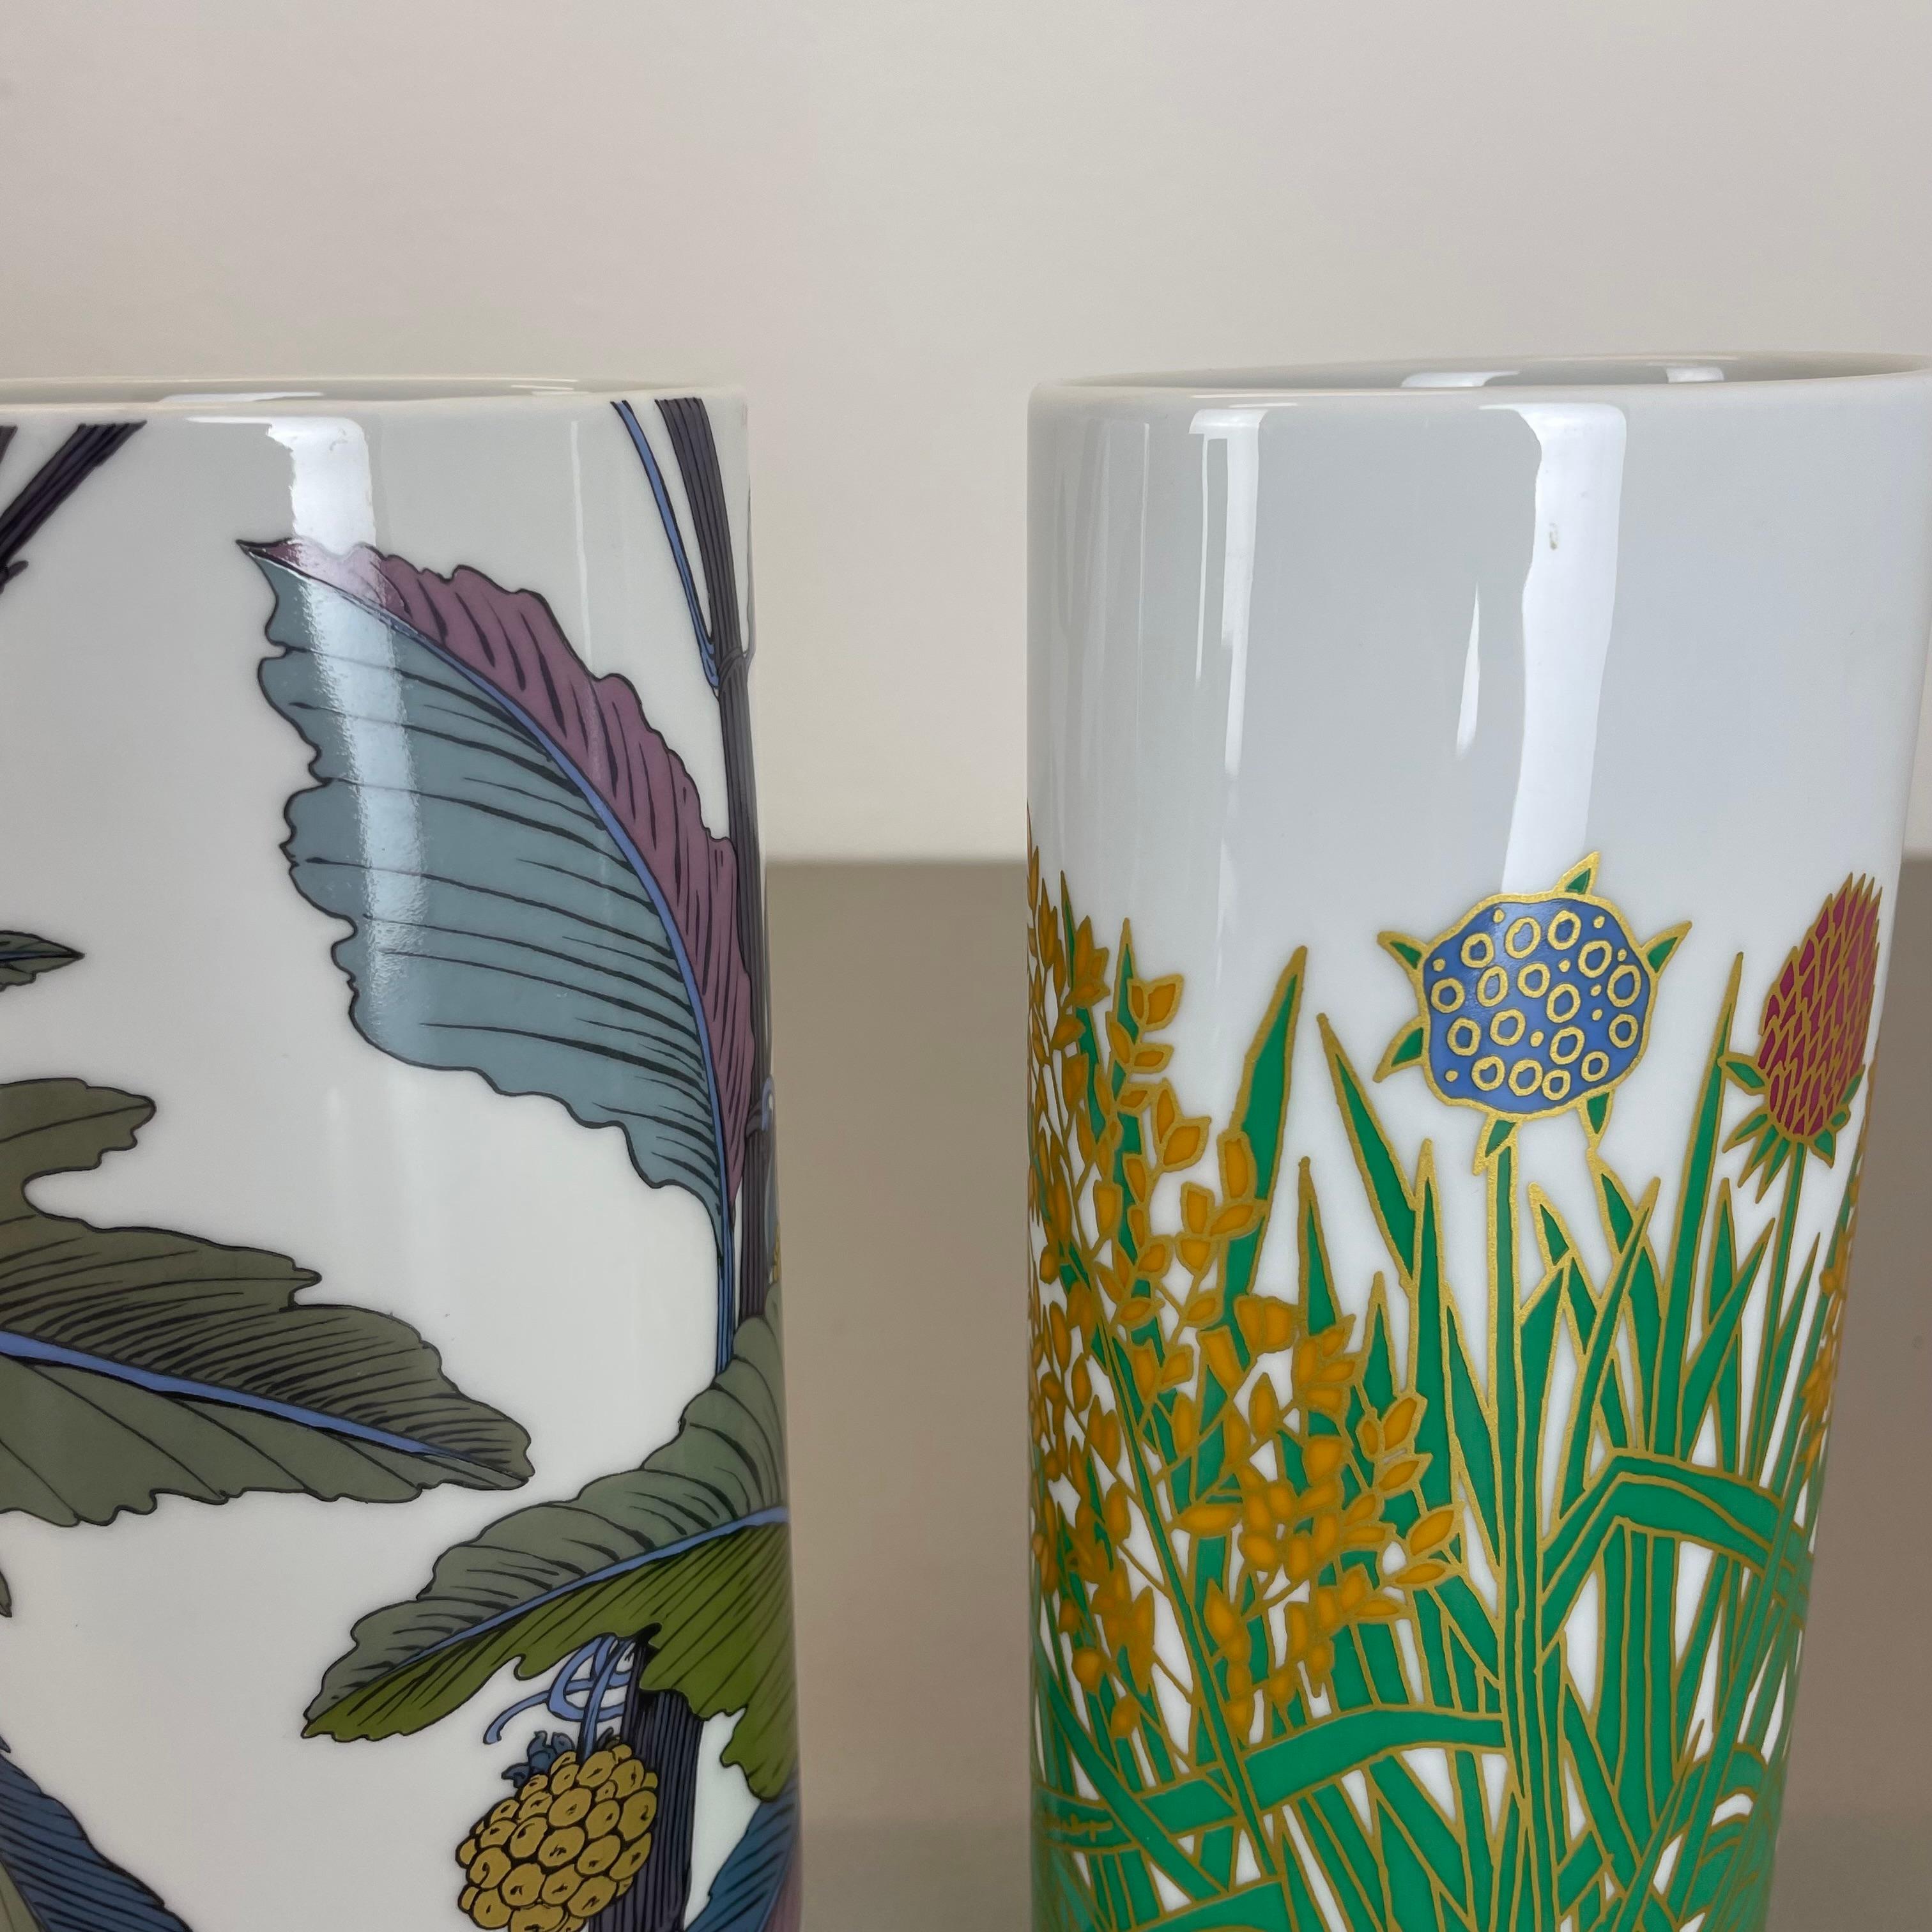 Set of 2 Floral Vases by W. Bauer and A. Le Foll for Rosenthal, Germany, 1980s For Sale 9